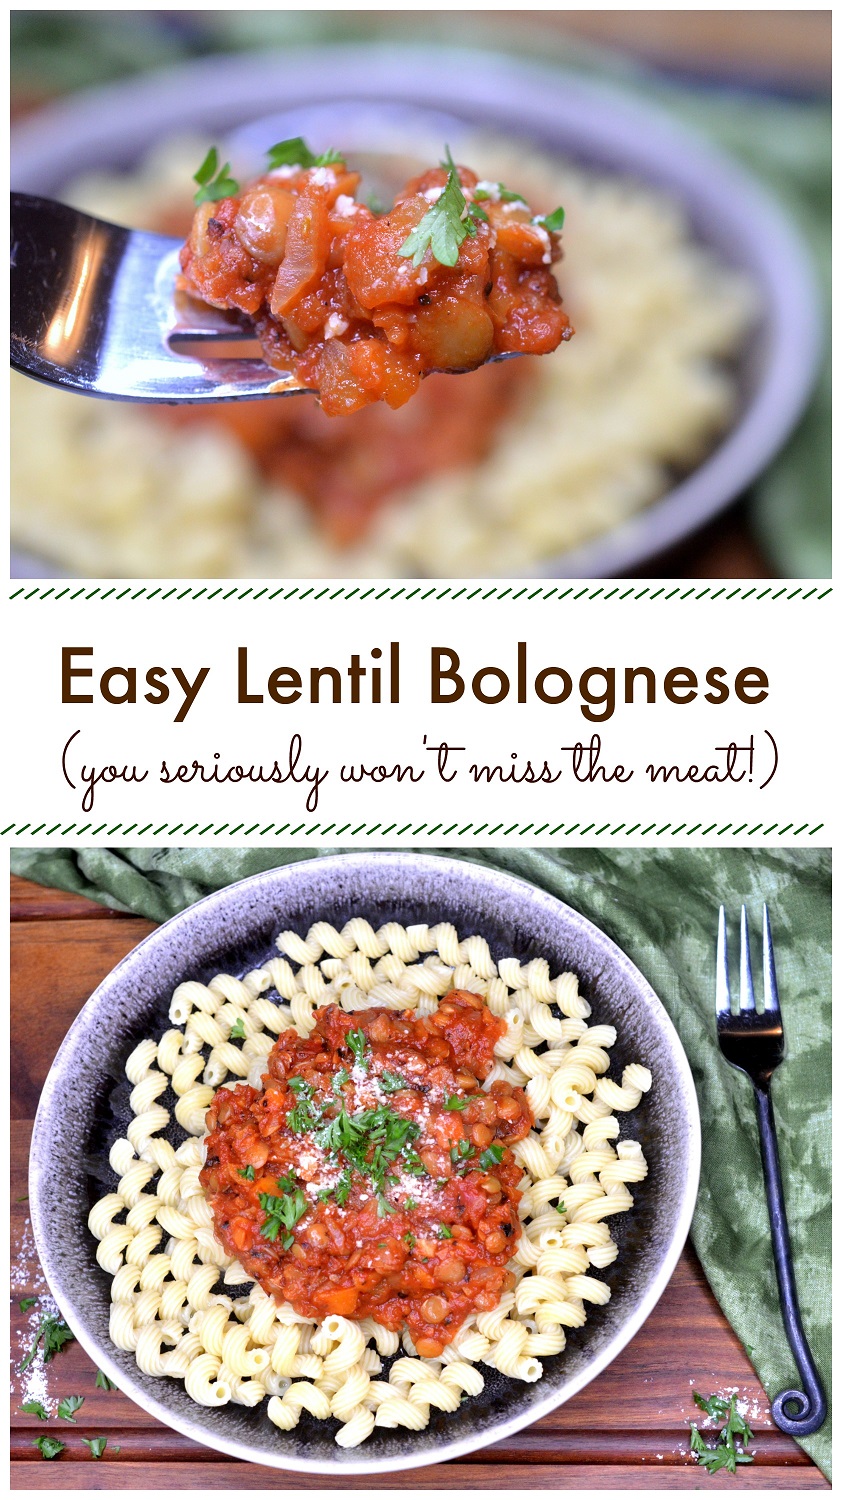 Rich and satisfying Lentil Bolognese Recipe